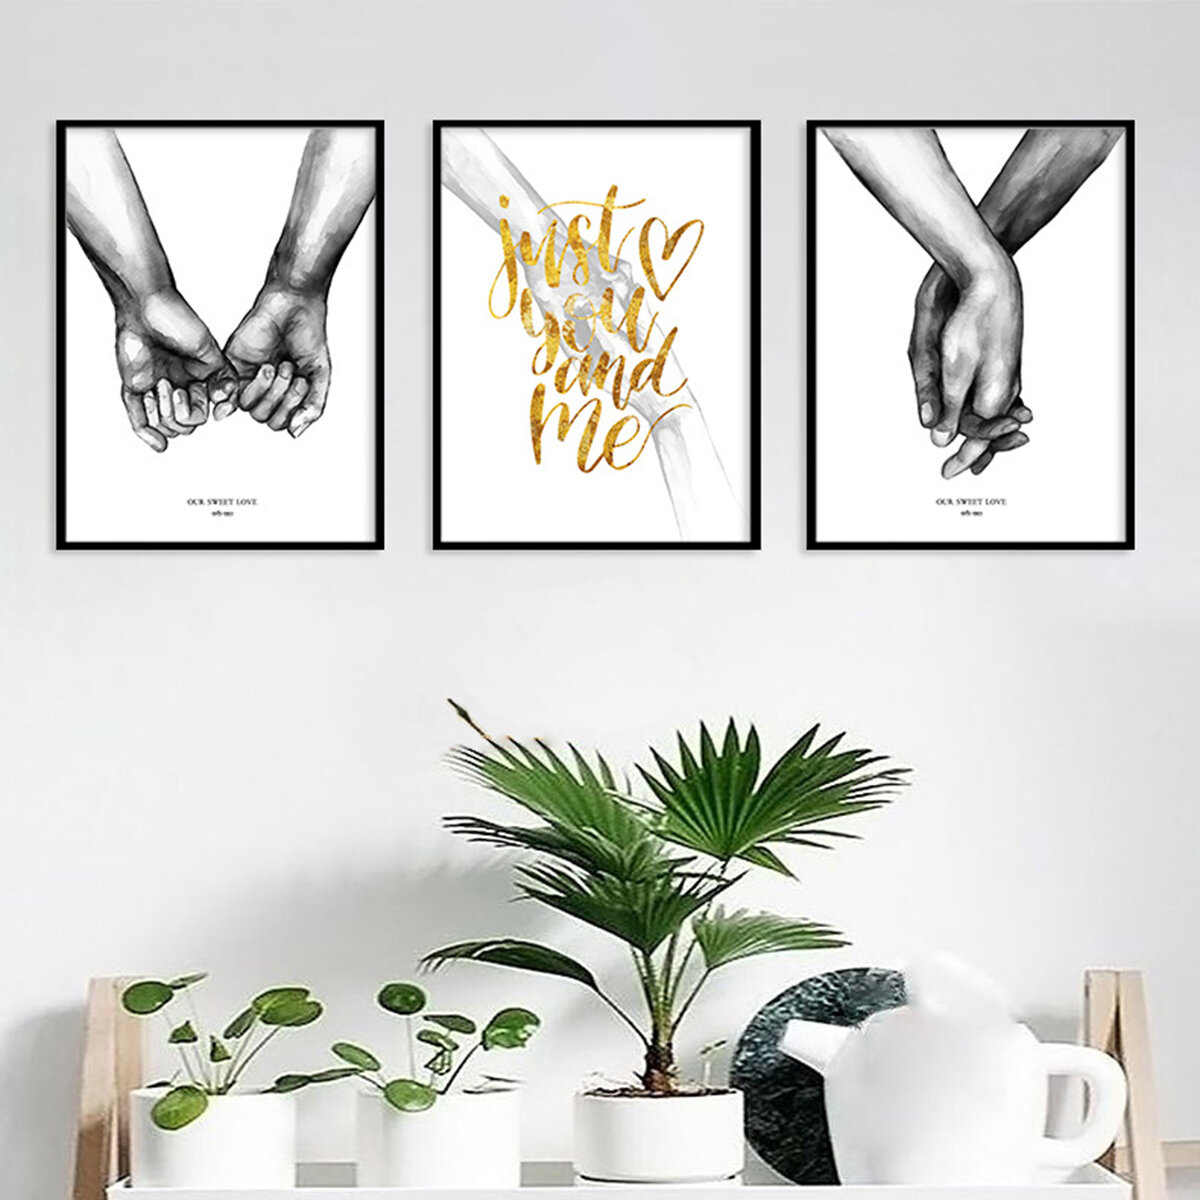 3pcs Nordic Poster Minimalist Hanging Painting 50*70cm Living Black And White Canvas Prints Love Wal